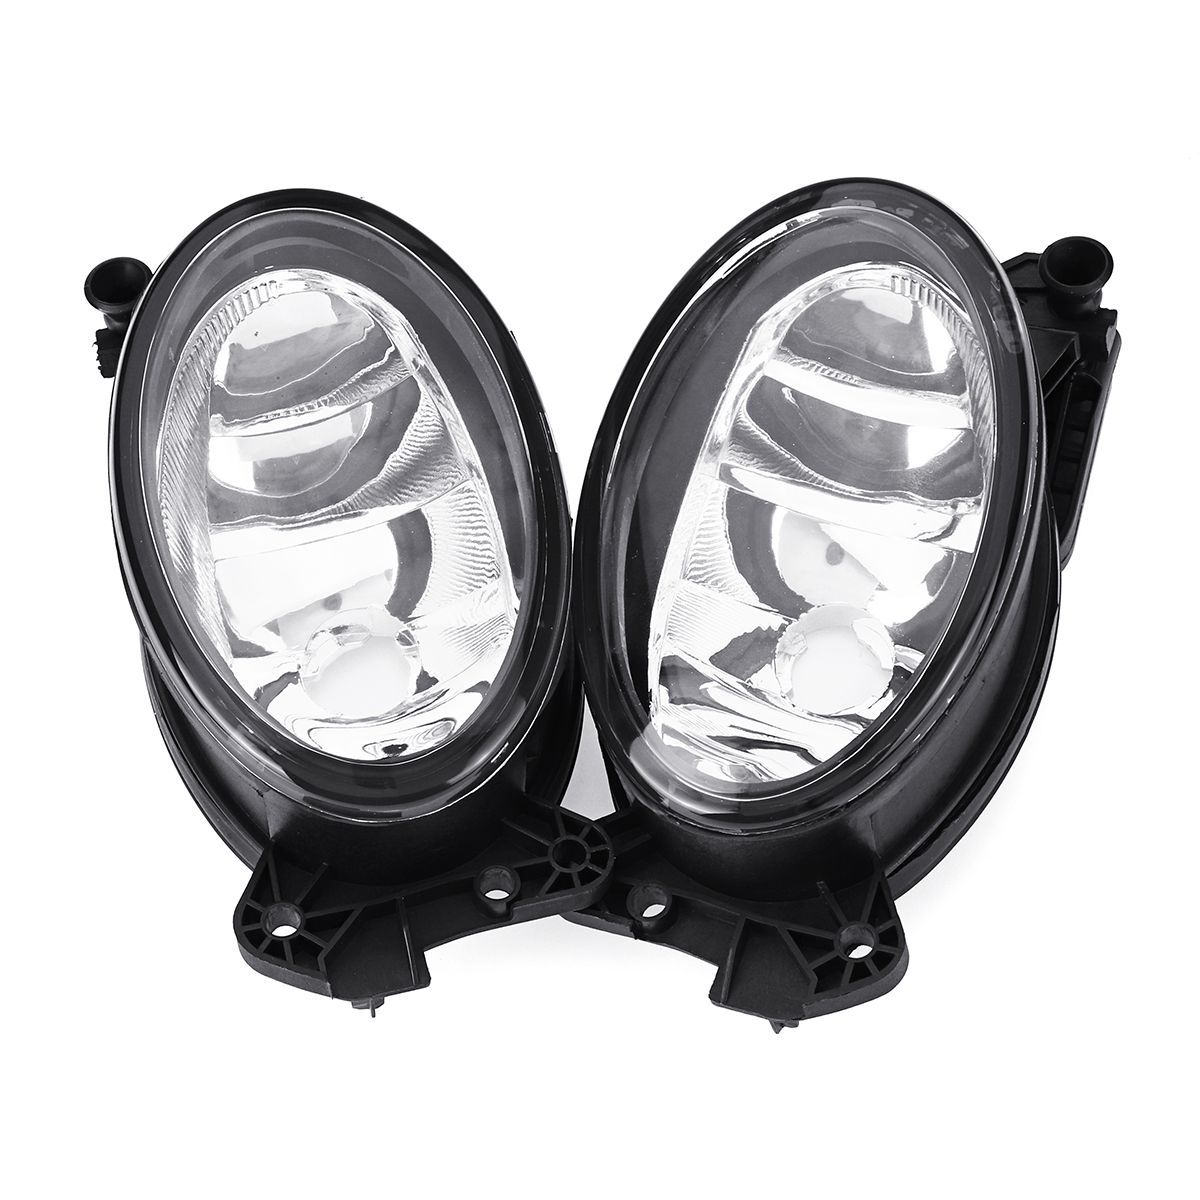 Car-Front-Bumper-Fog-Lights-Lamp-Case-with-No-Bulb-For-Benz-W204-W211-W219-W164-2007-2012-1579820